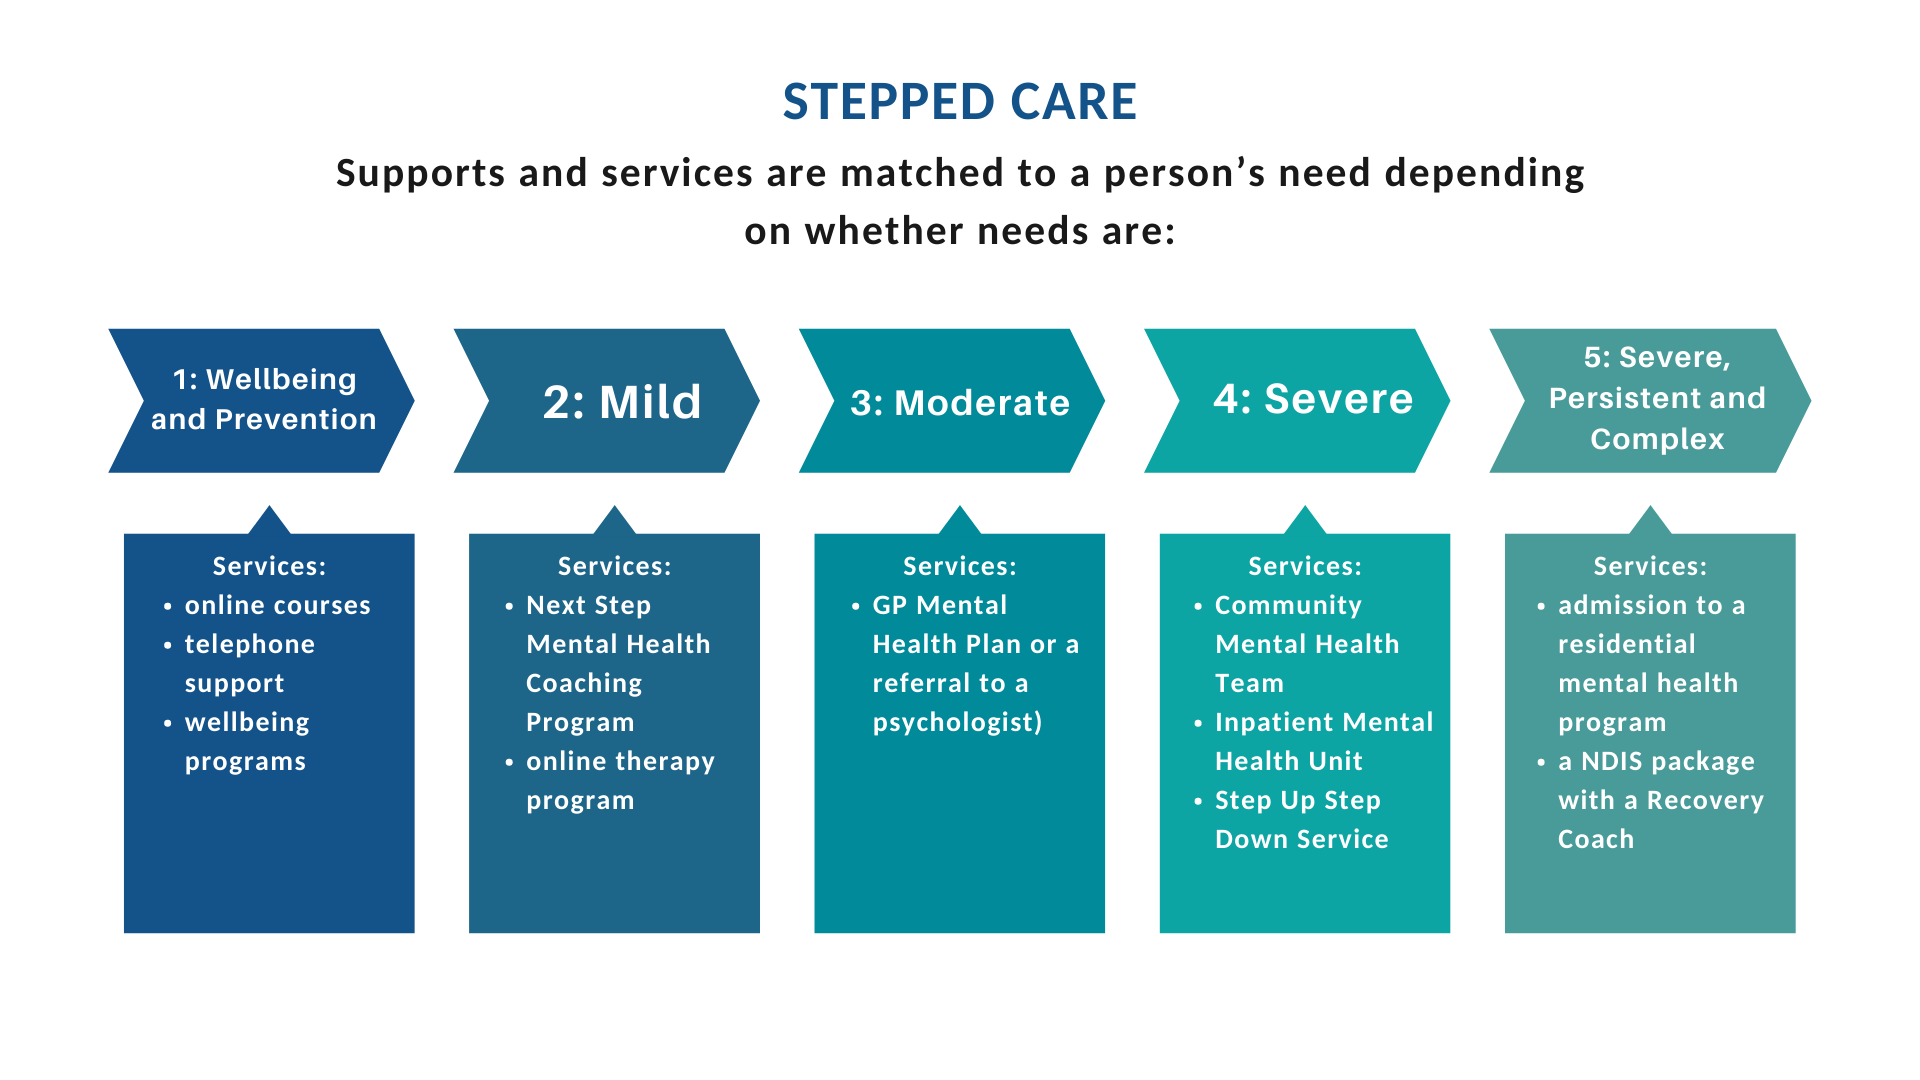 An infographic of the spectrum of stepped care and services available at each level